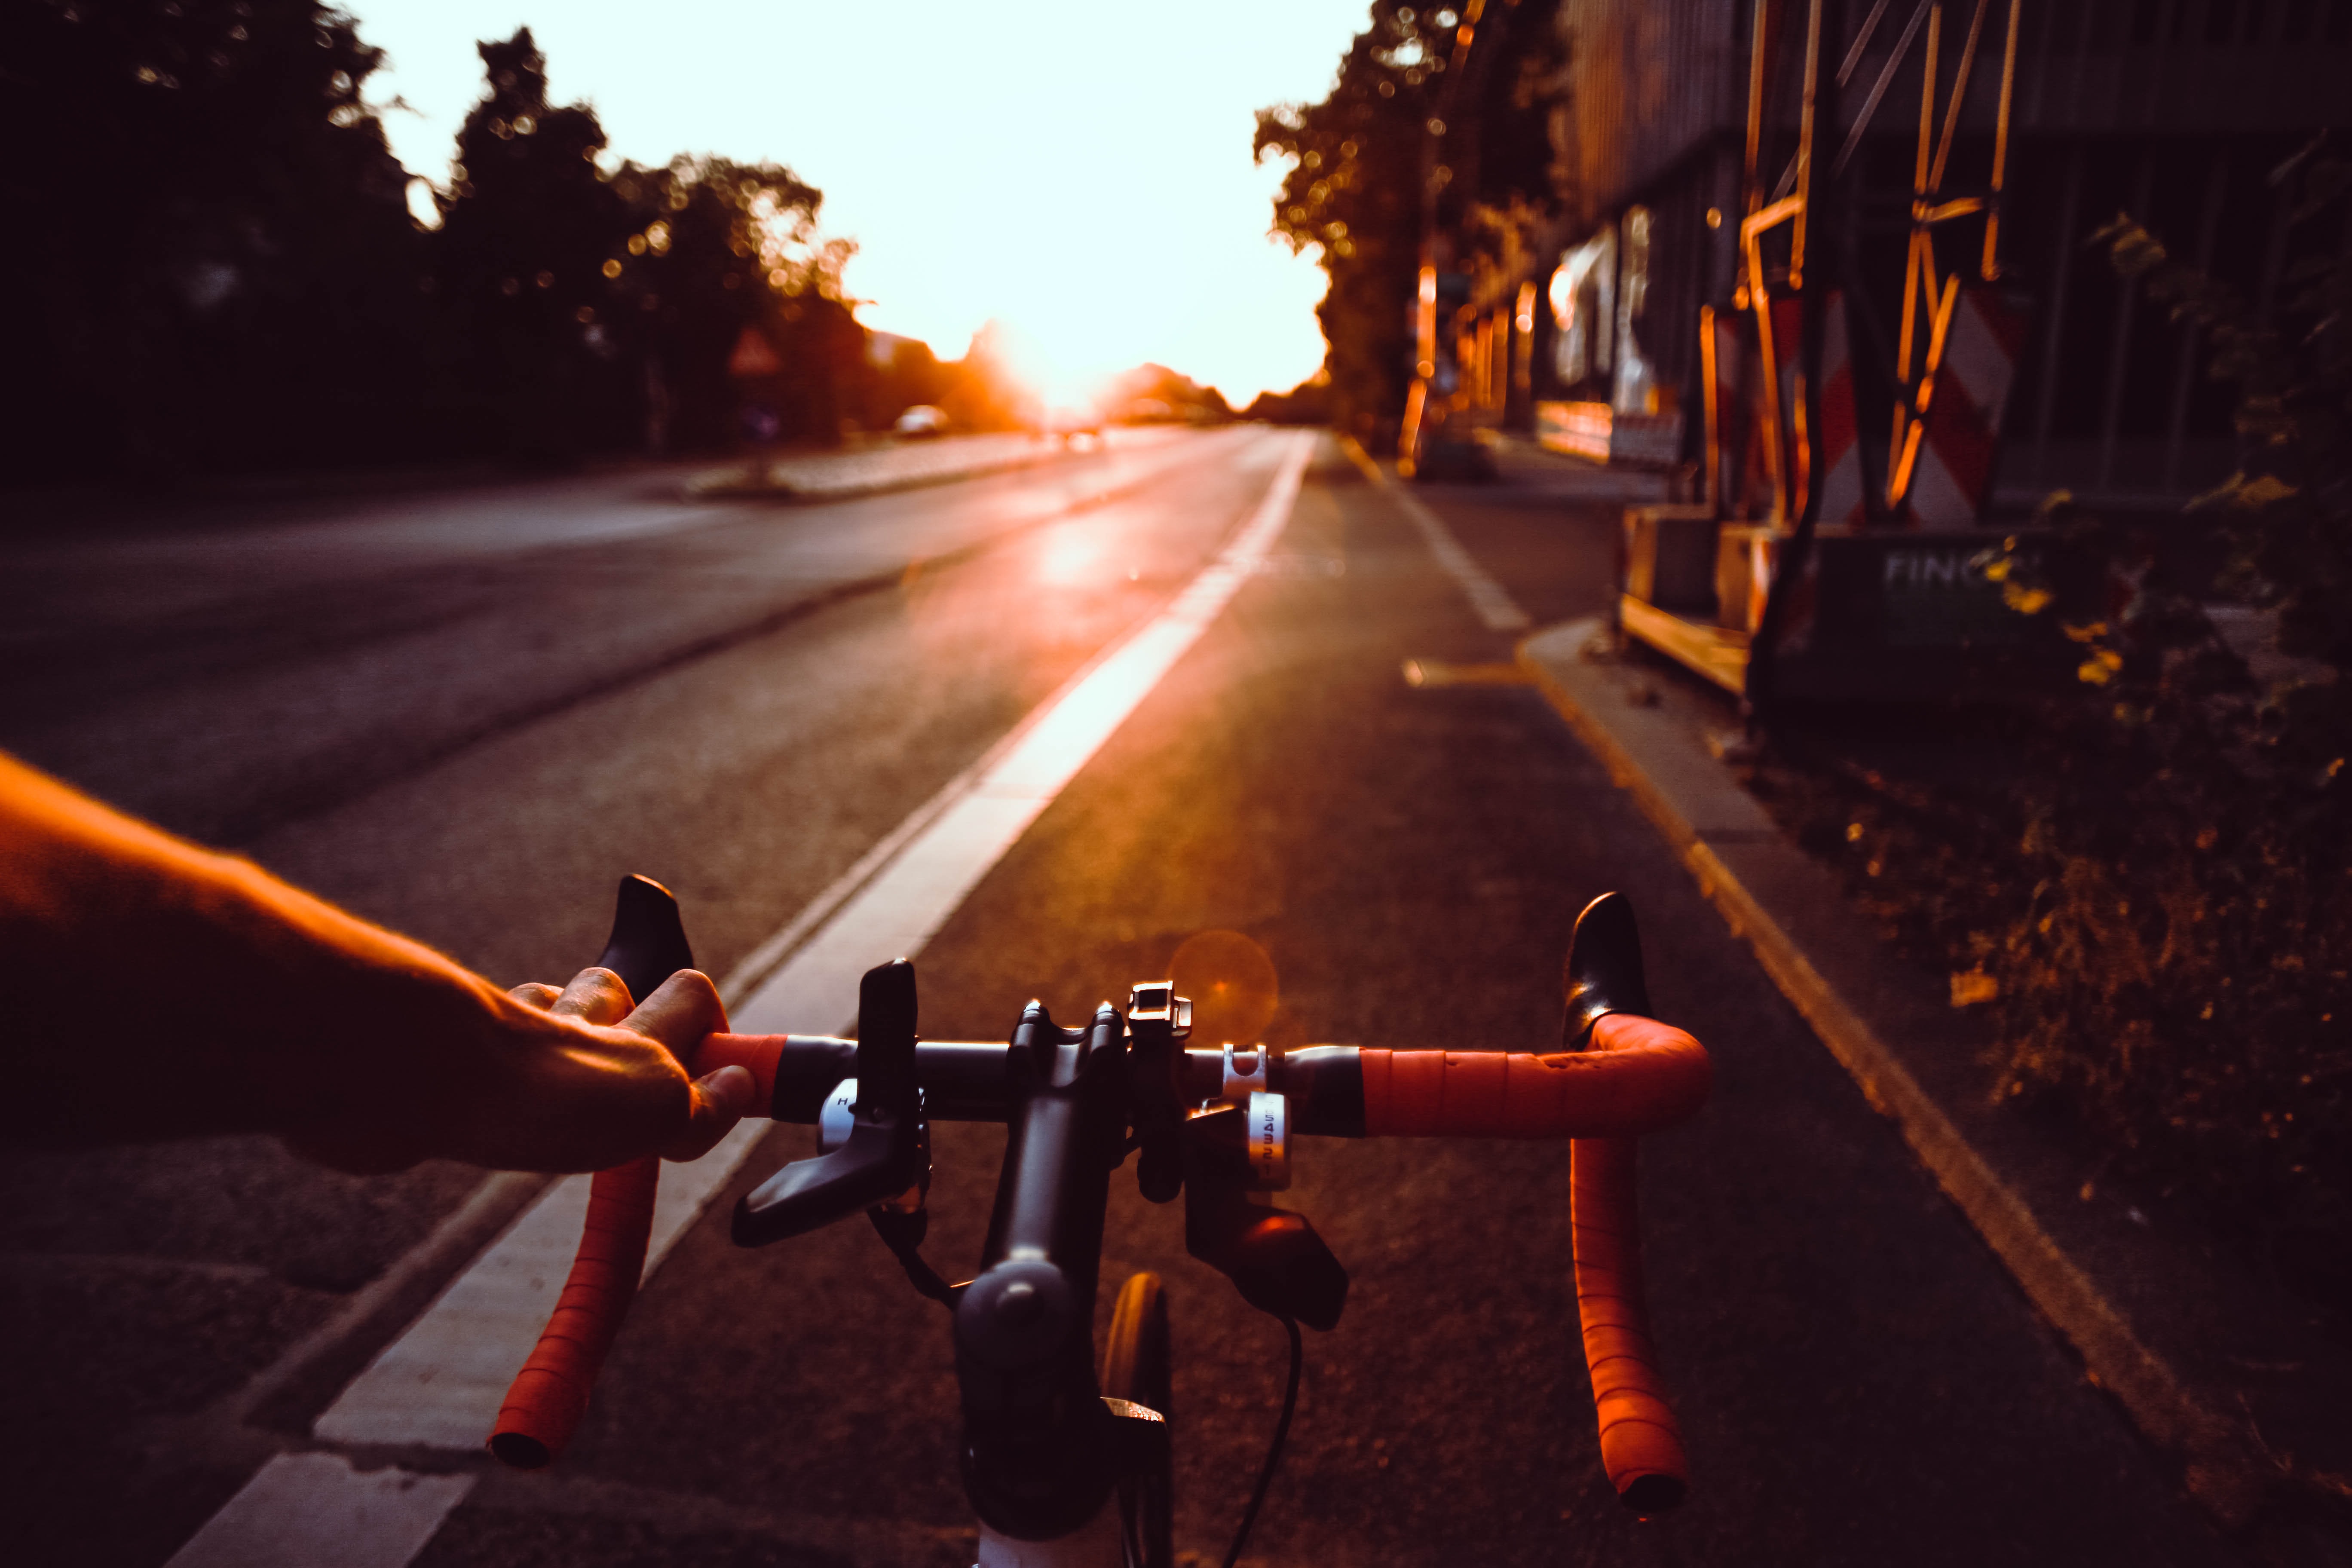 View of bicylist riding in the bicycle lane on the street viewing the sunrise